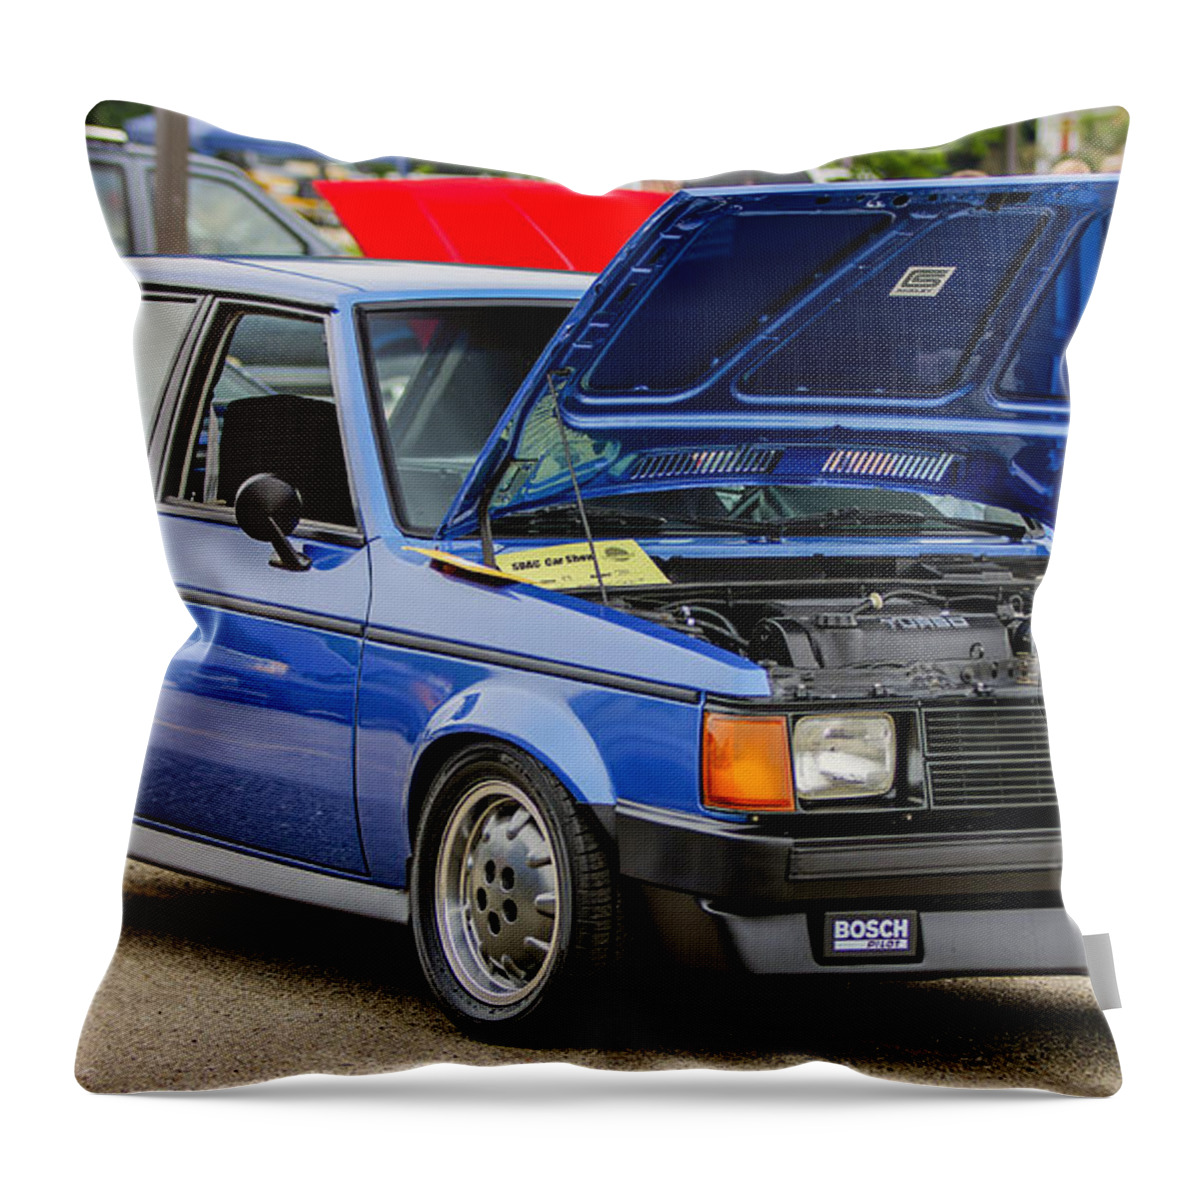 Dodge Omni Glh Throw Pillow featuring the photograph Car Show 078 by Josh Bryant